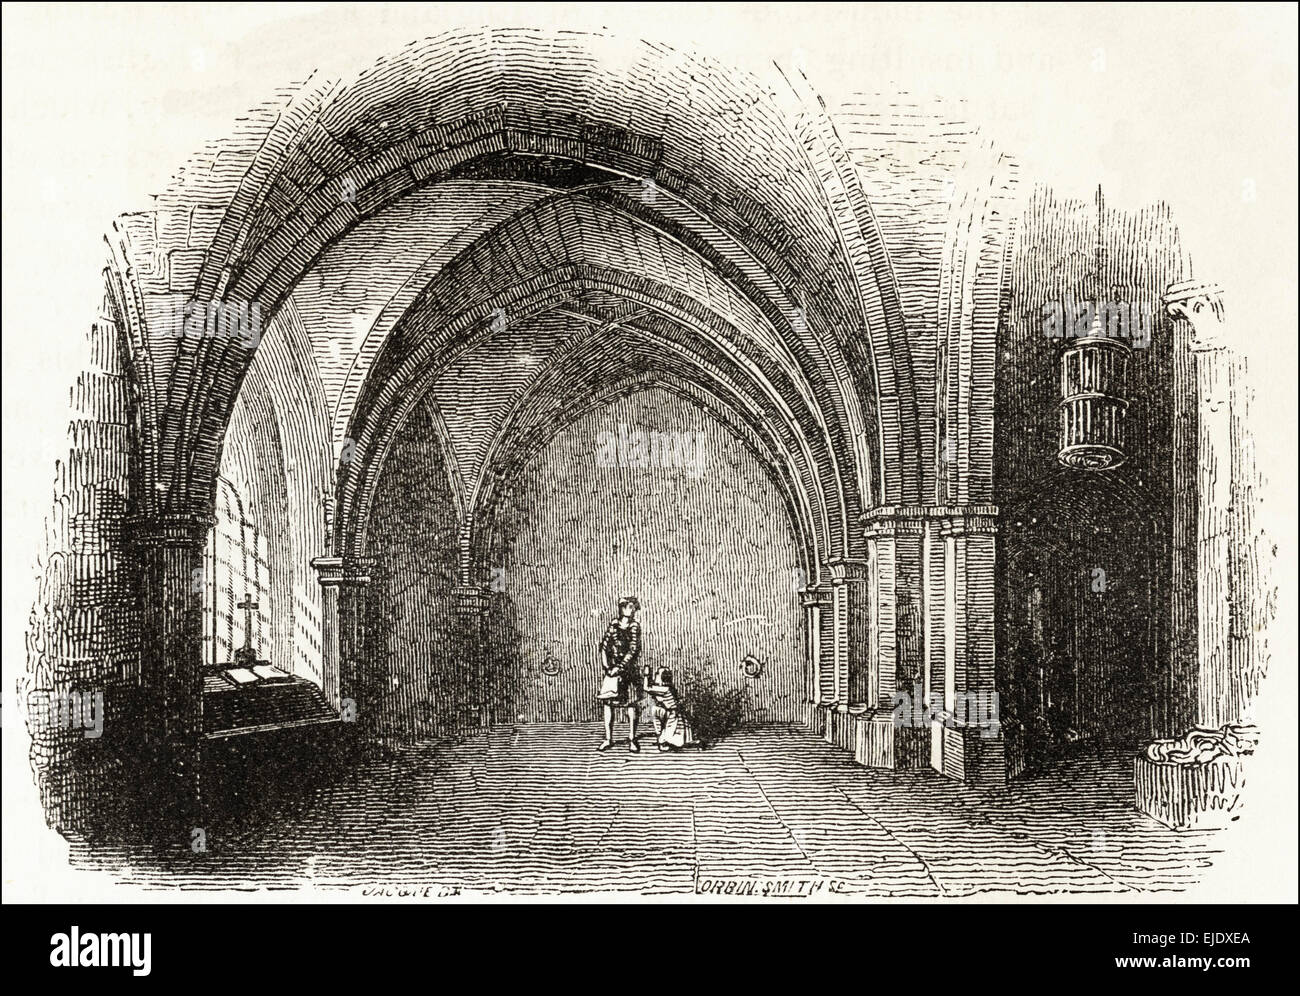 Vaulted ceiling of 12th century English chapel. Victorian woodcut engraving circa 1845. Stock Photo